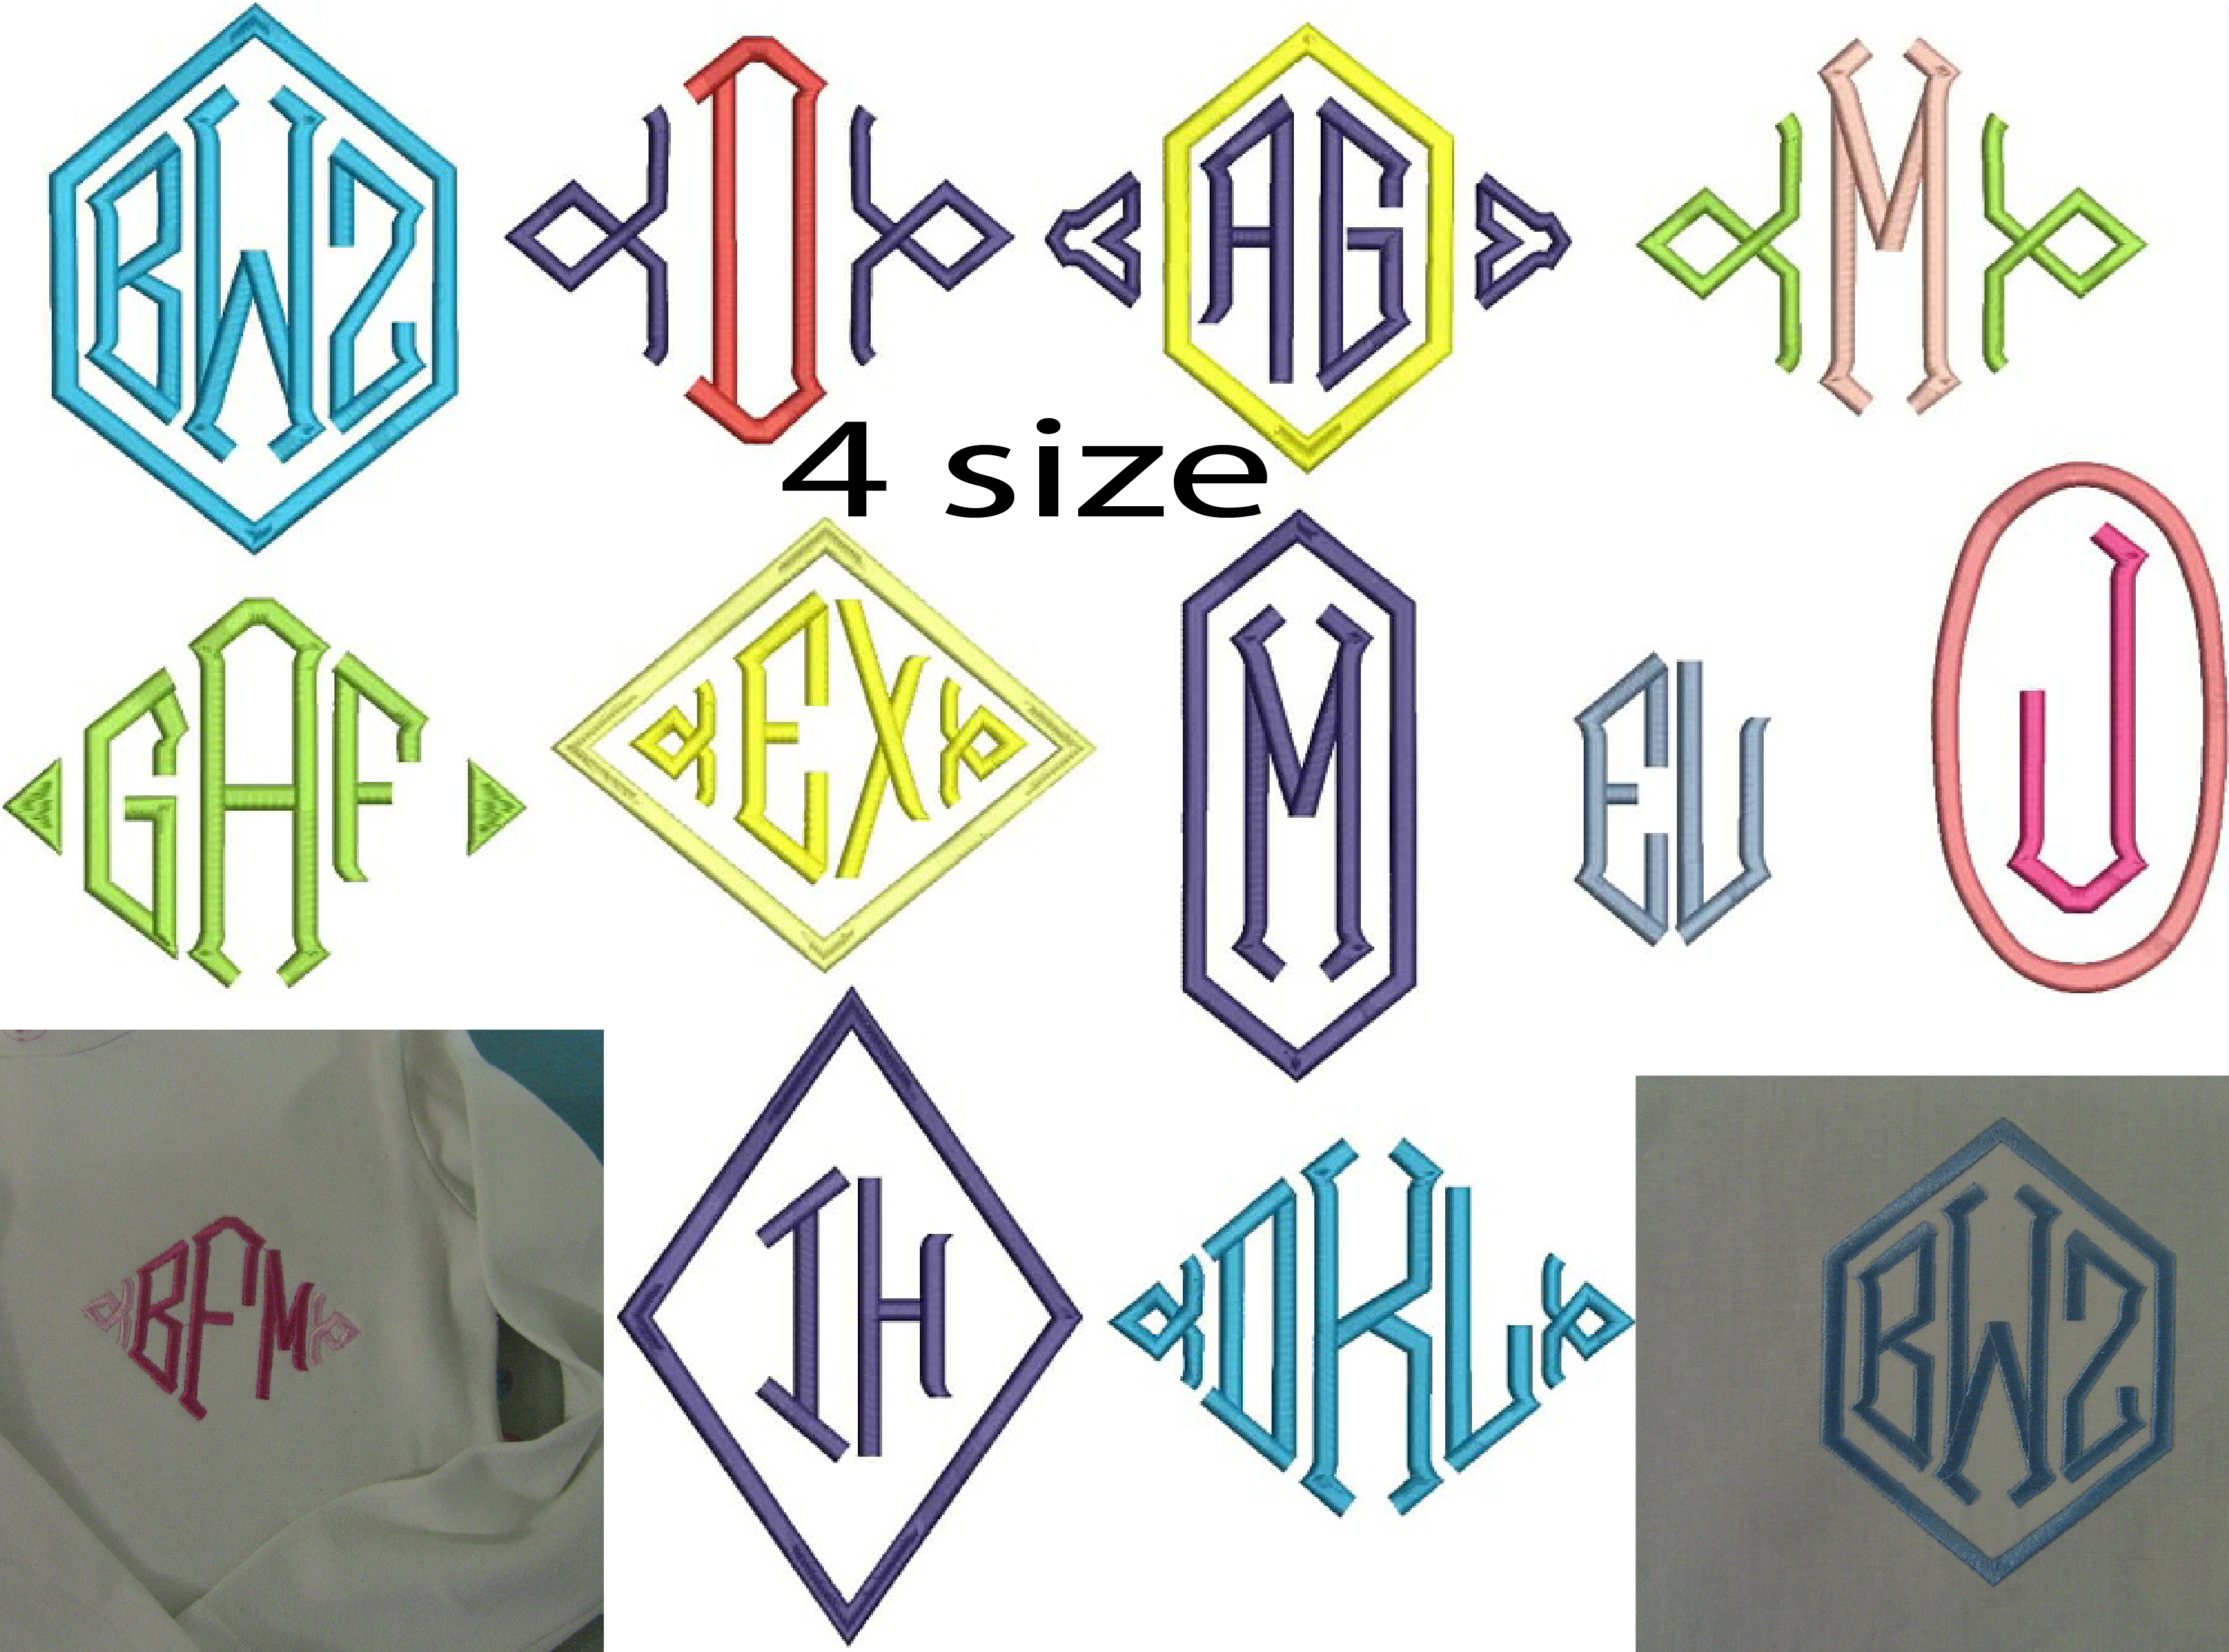 Monogram Patterns For Embroidery Machine Embroidery Designs Digital Designs Embroidery Frame Instant Download Monogram Fonts For Embroidery Monogram Embroidery Fonts